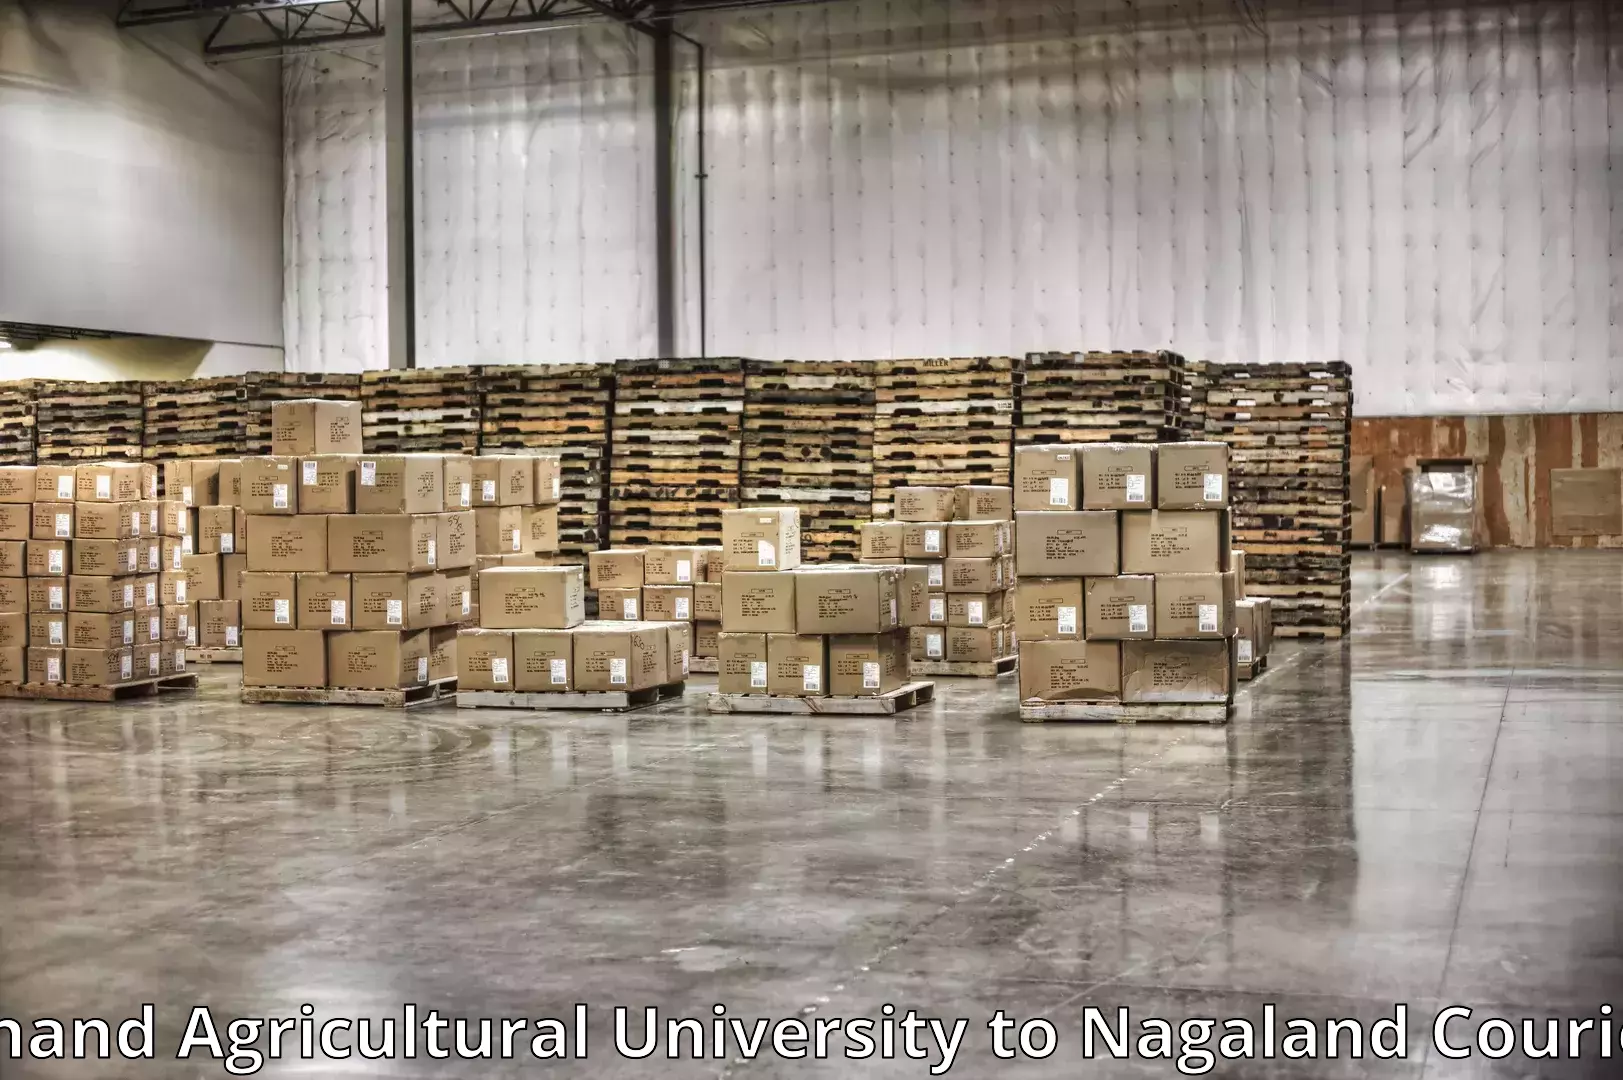 Furniture transport specialists Anand Agricultural University to Peren